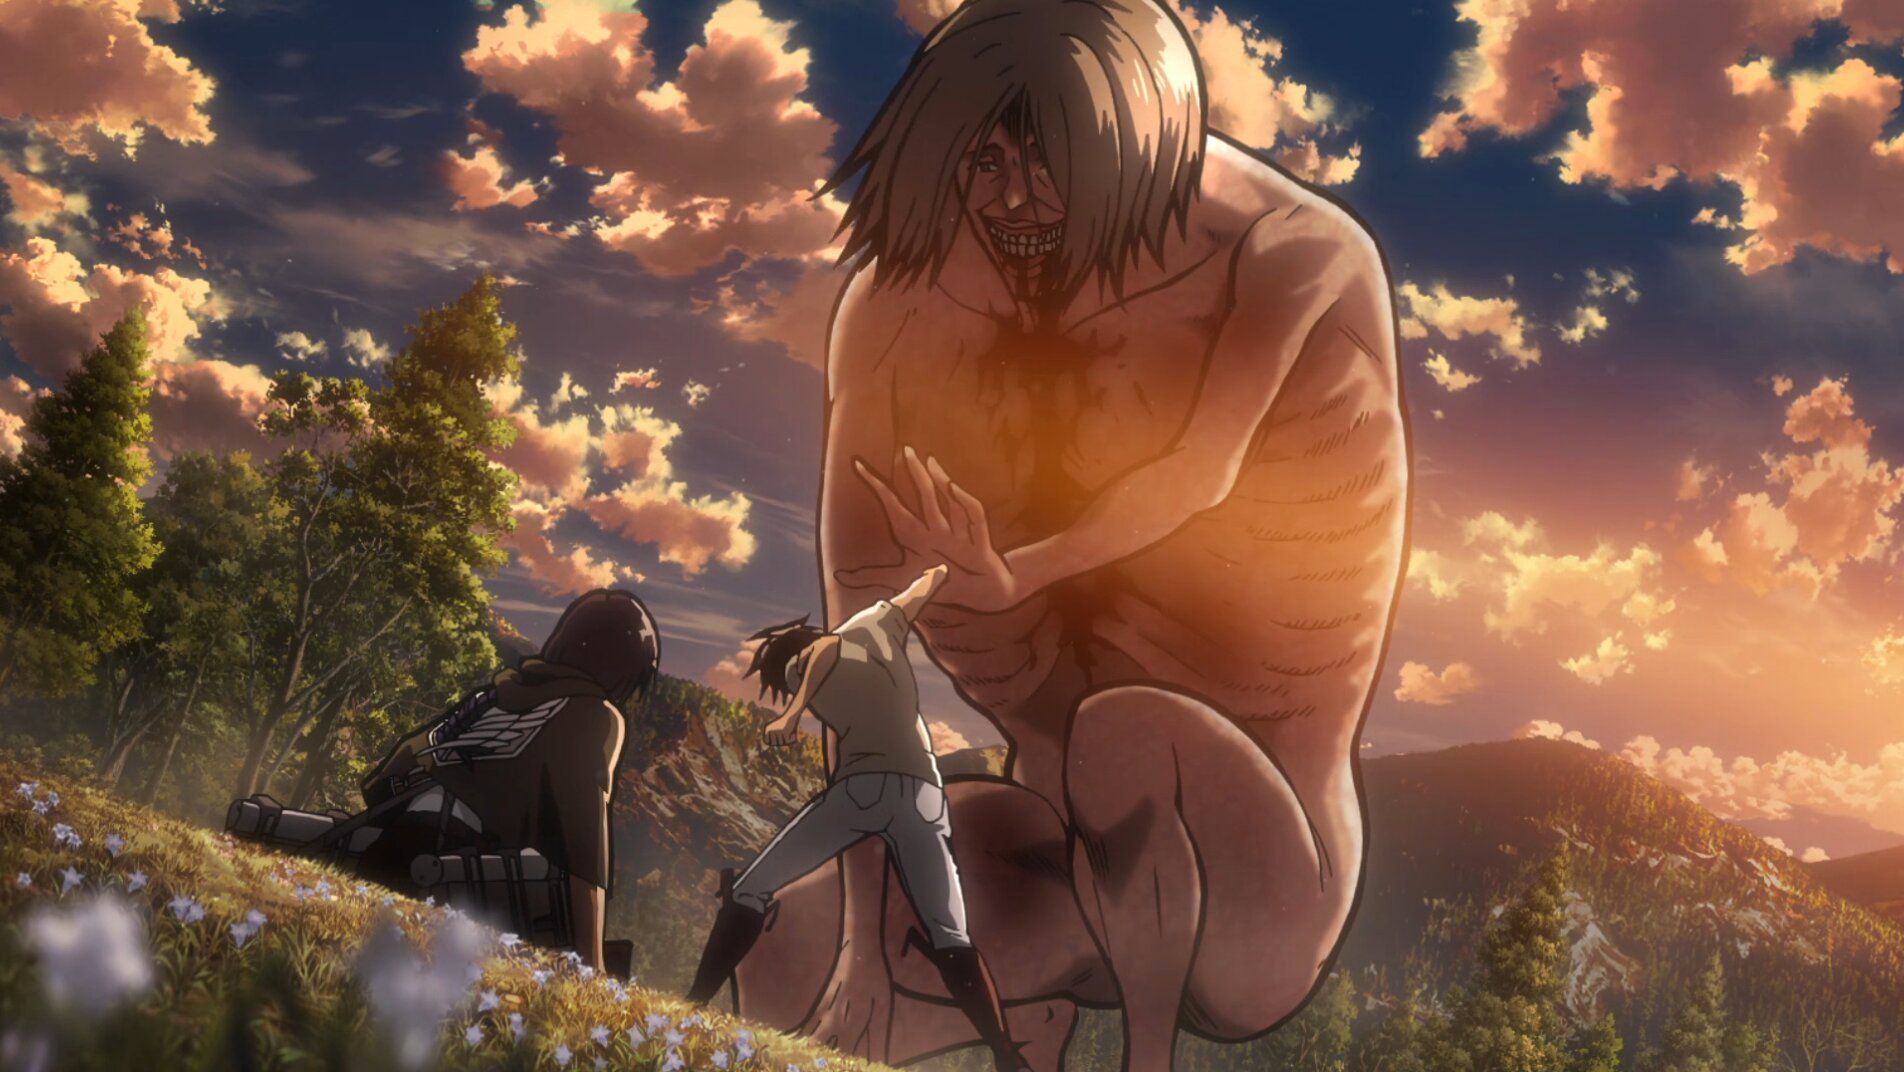 eren triggers the coordinate punching the outstretched hand of the smiling titan